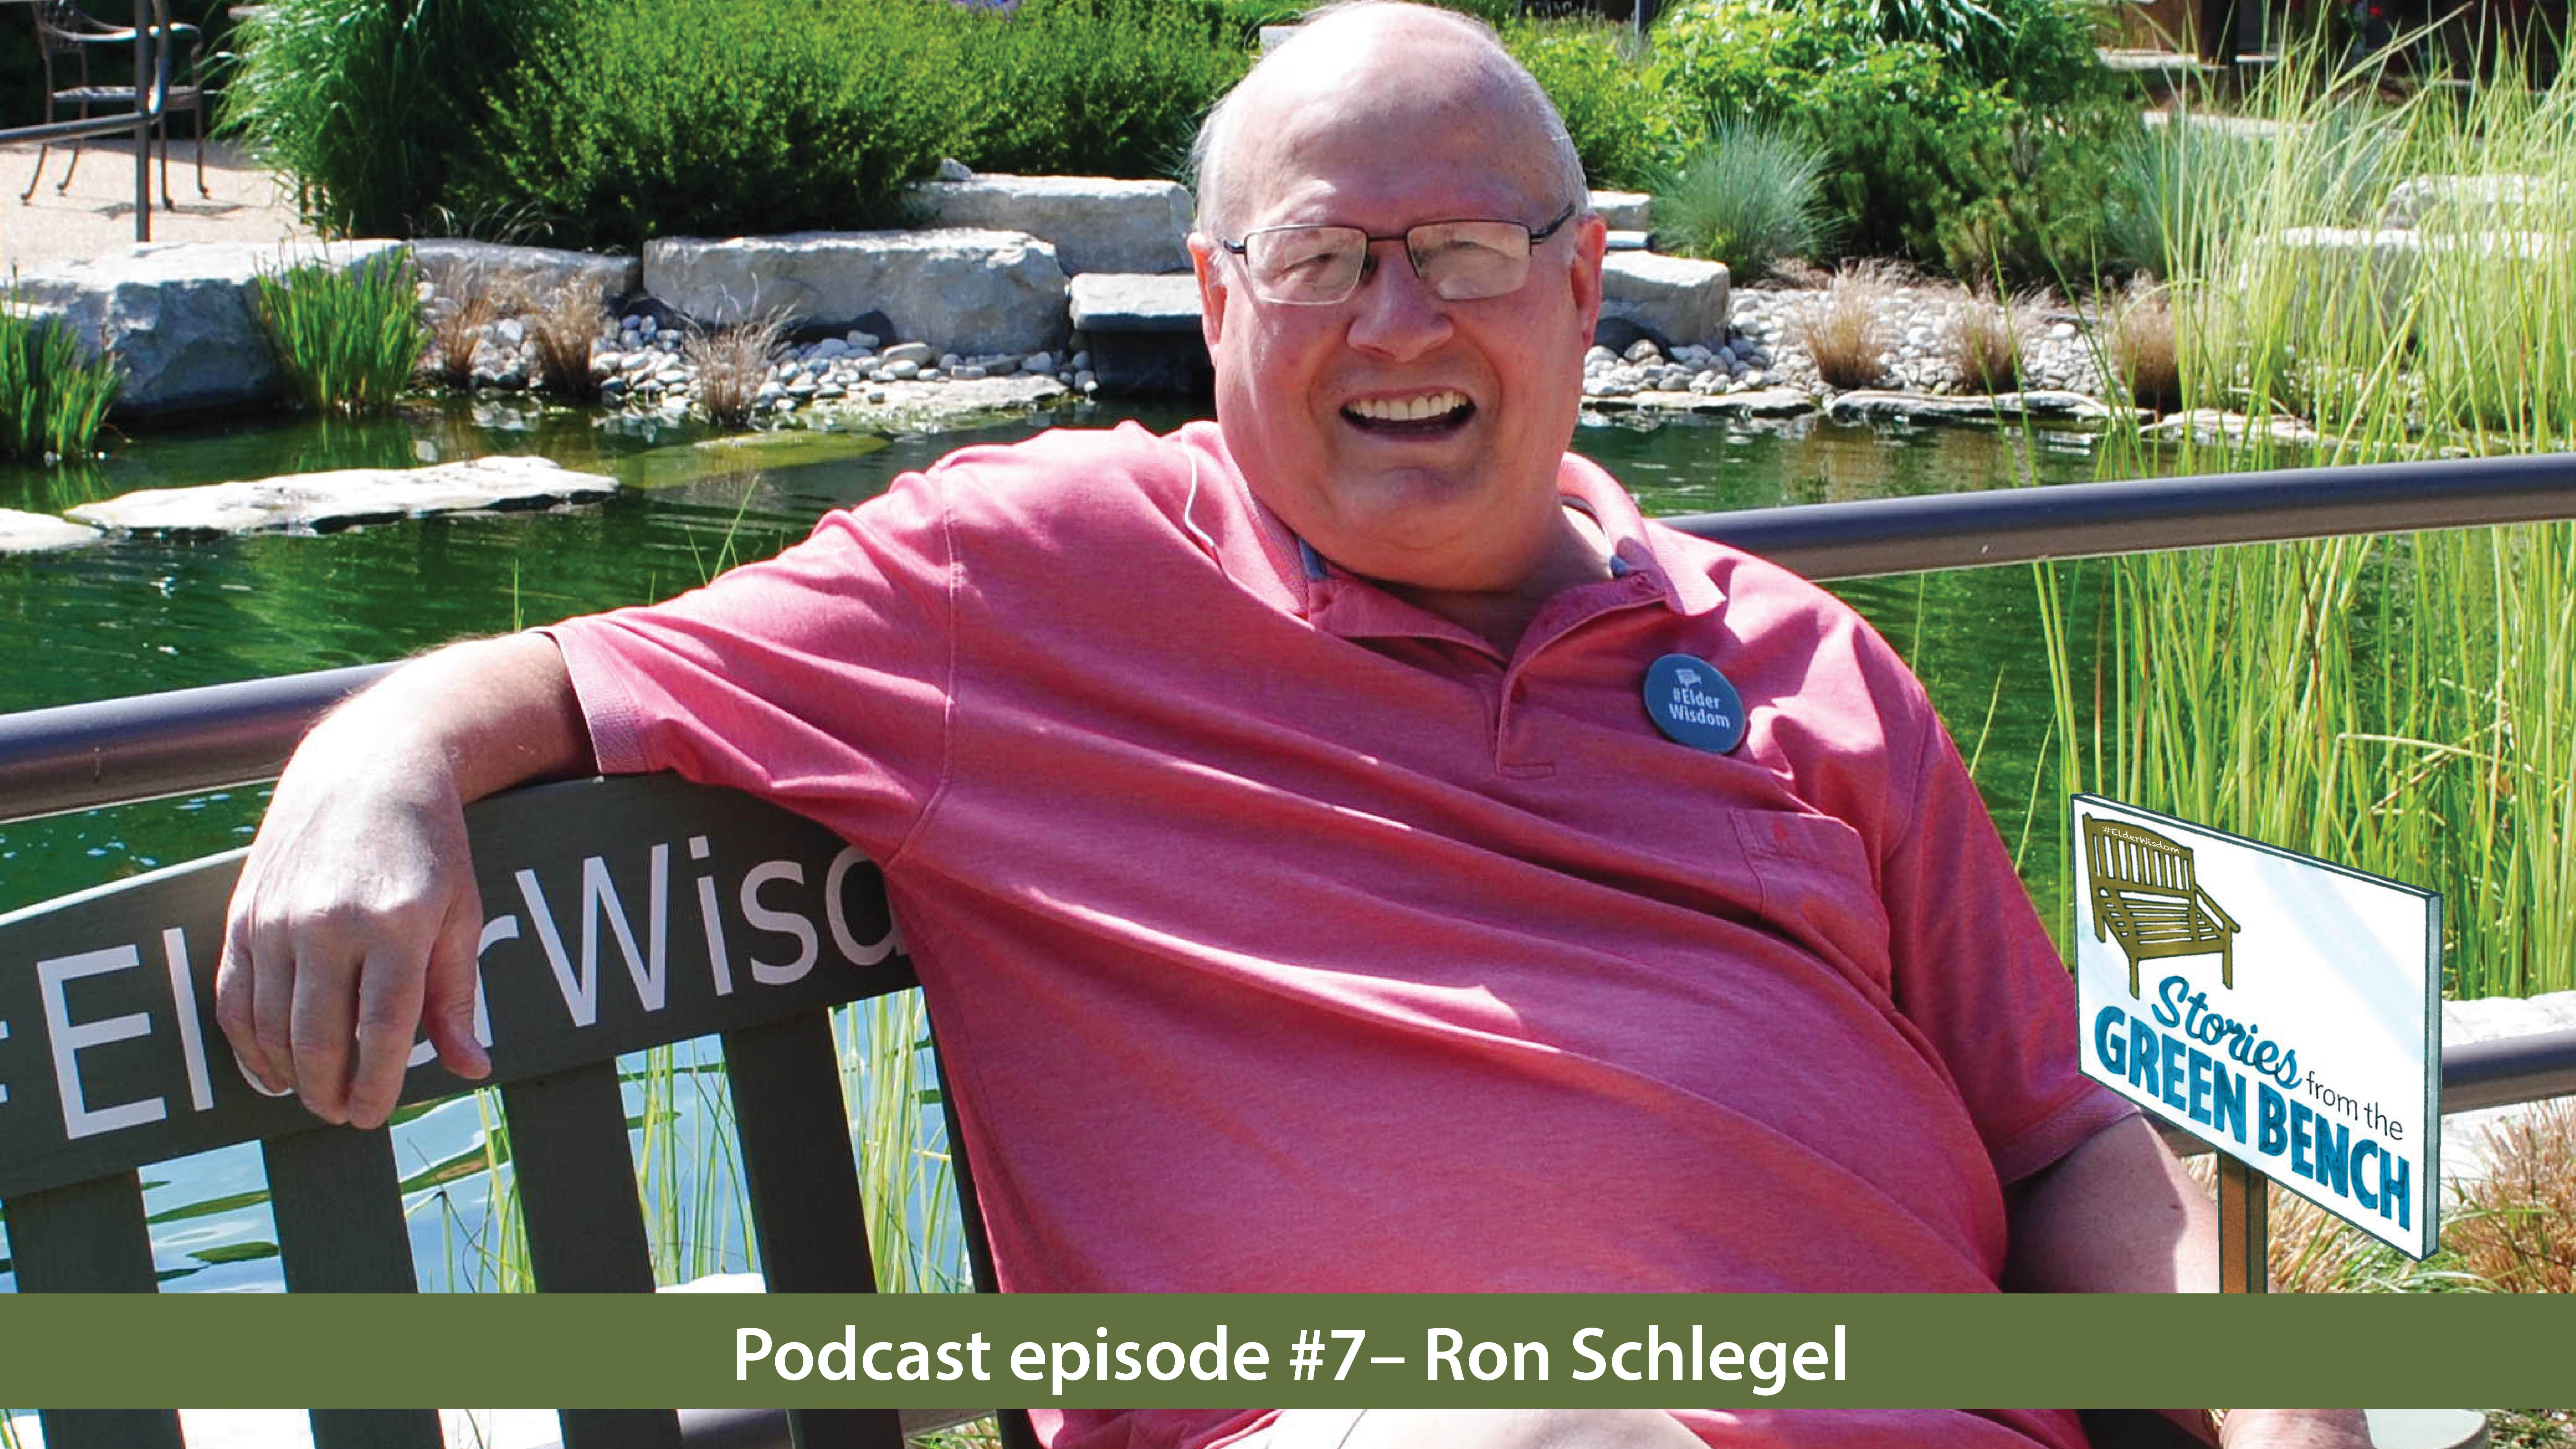 Ron Schlegel sitting on the #ElderWisdom bench in promotion of the Stories from the Green Bench podcast